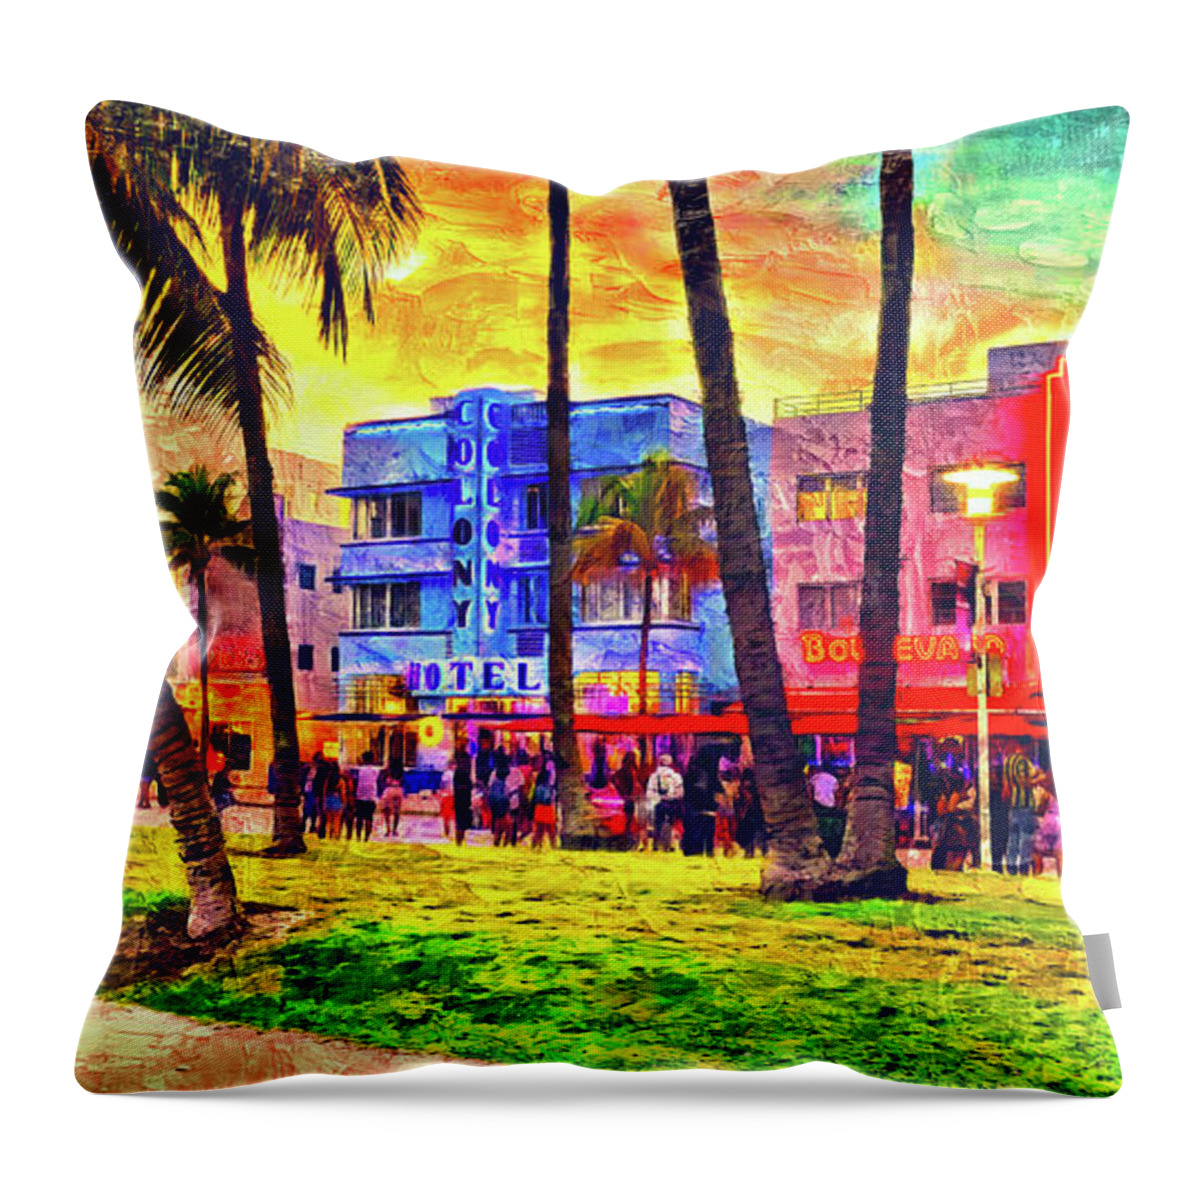 Ocean Drive Throw Pillow featuring the digital art Ocean Drive near the Colony Hotel in Miami Beach at sunset - impasto oil painting by Nicko Prints